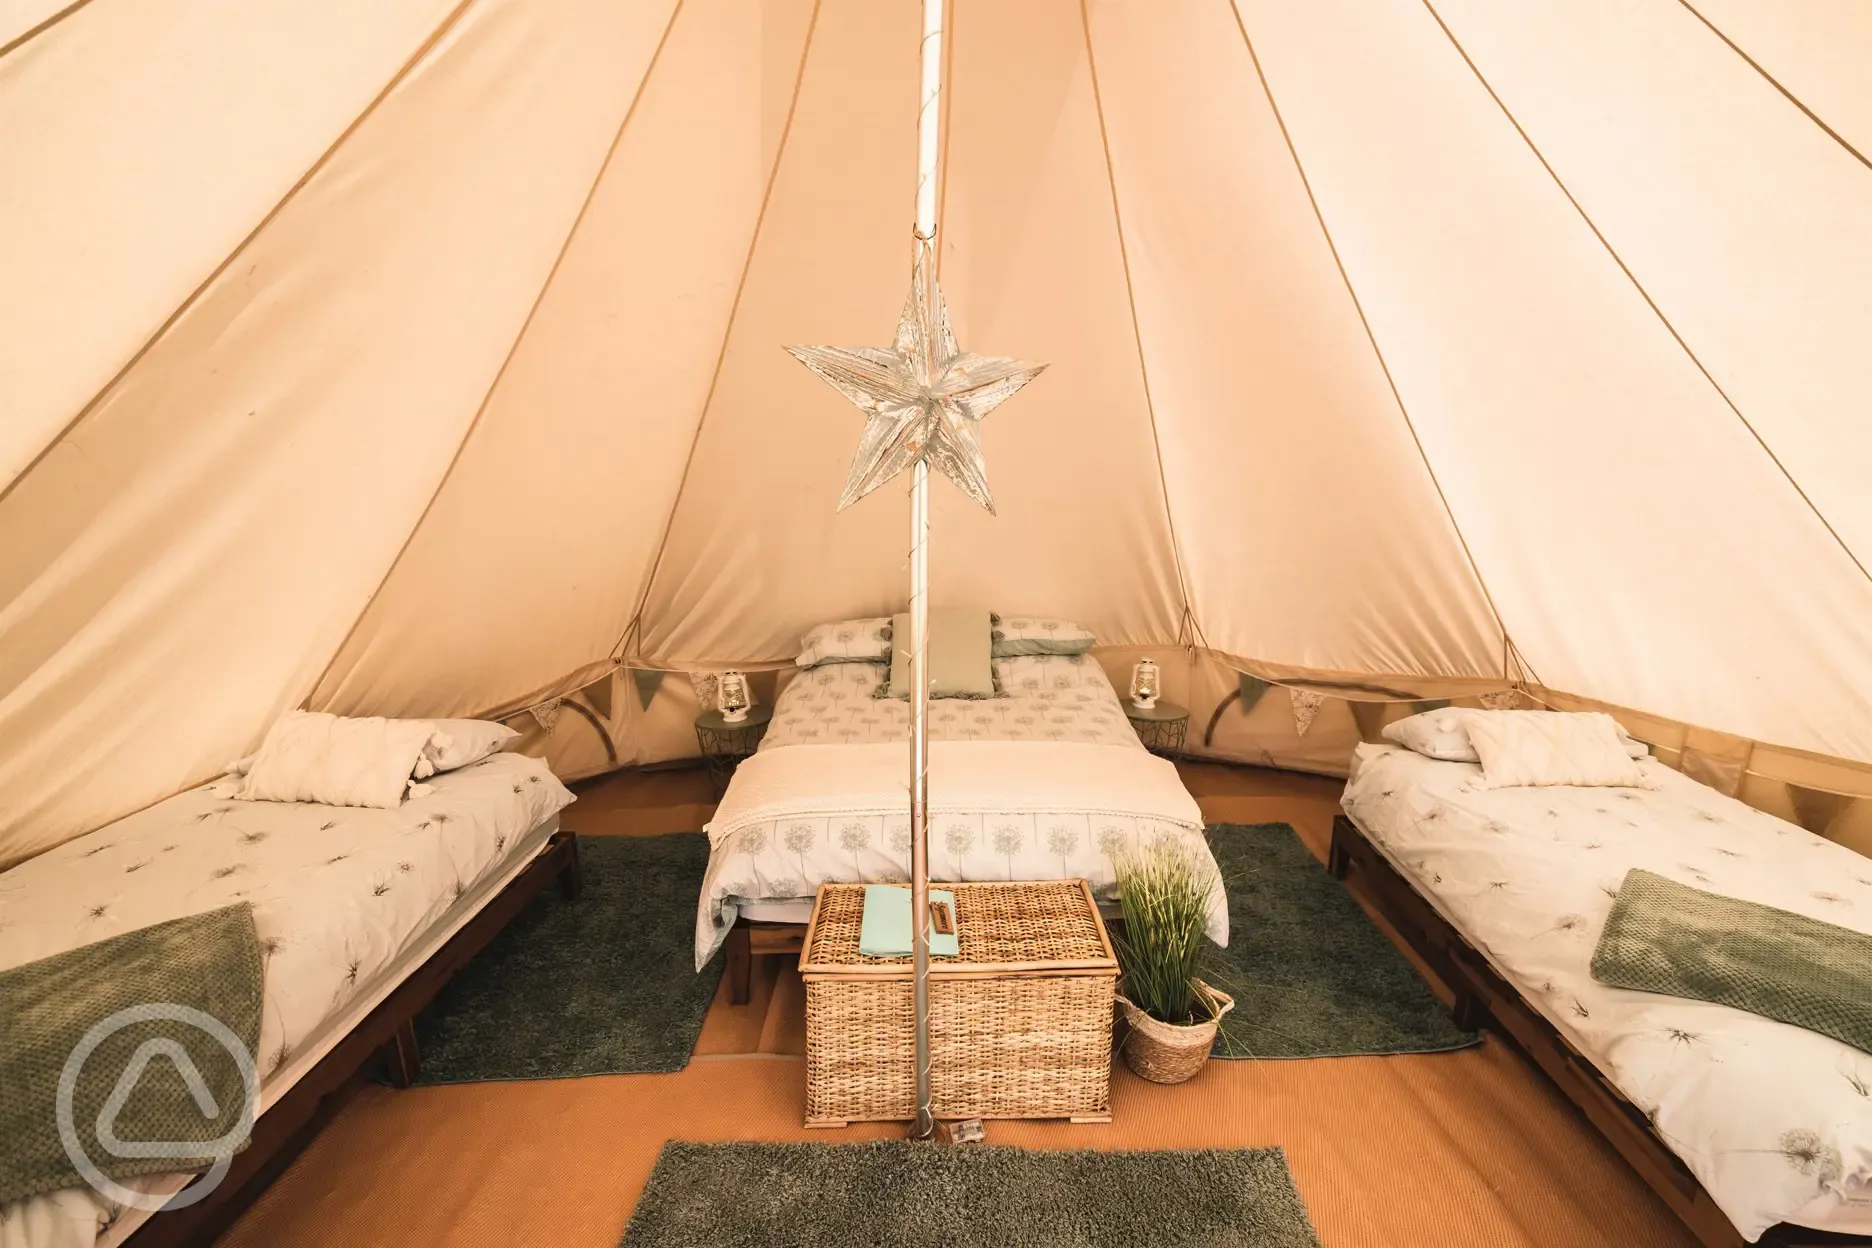 Sycamore Tent